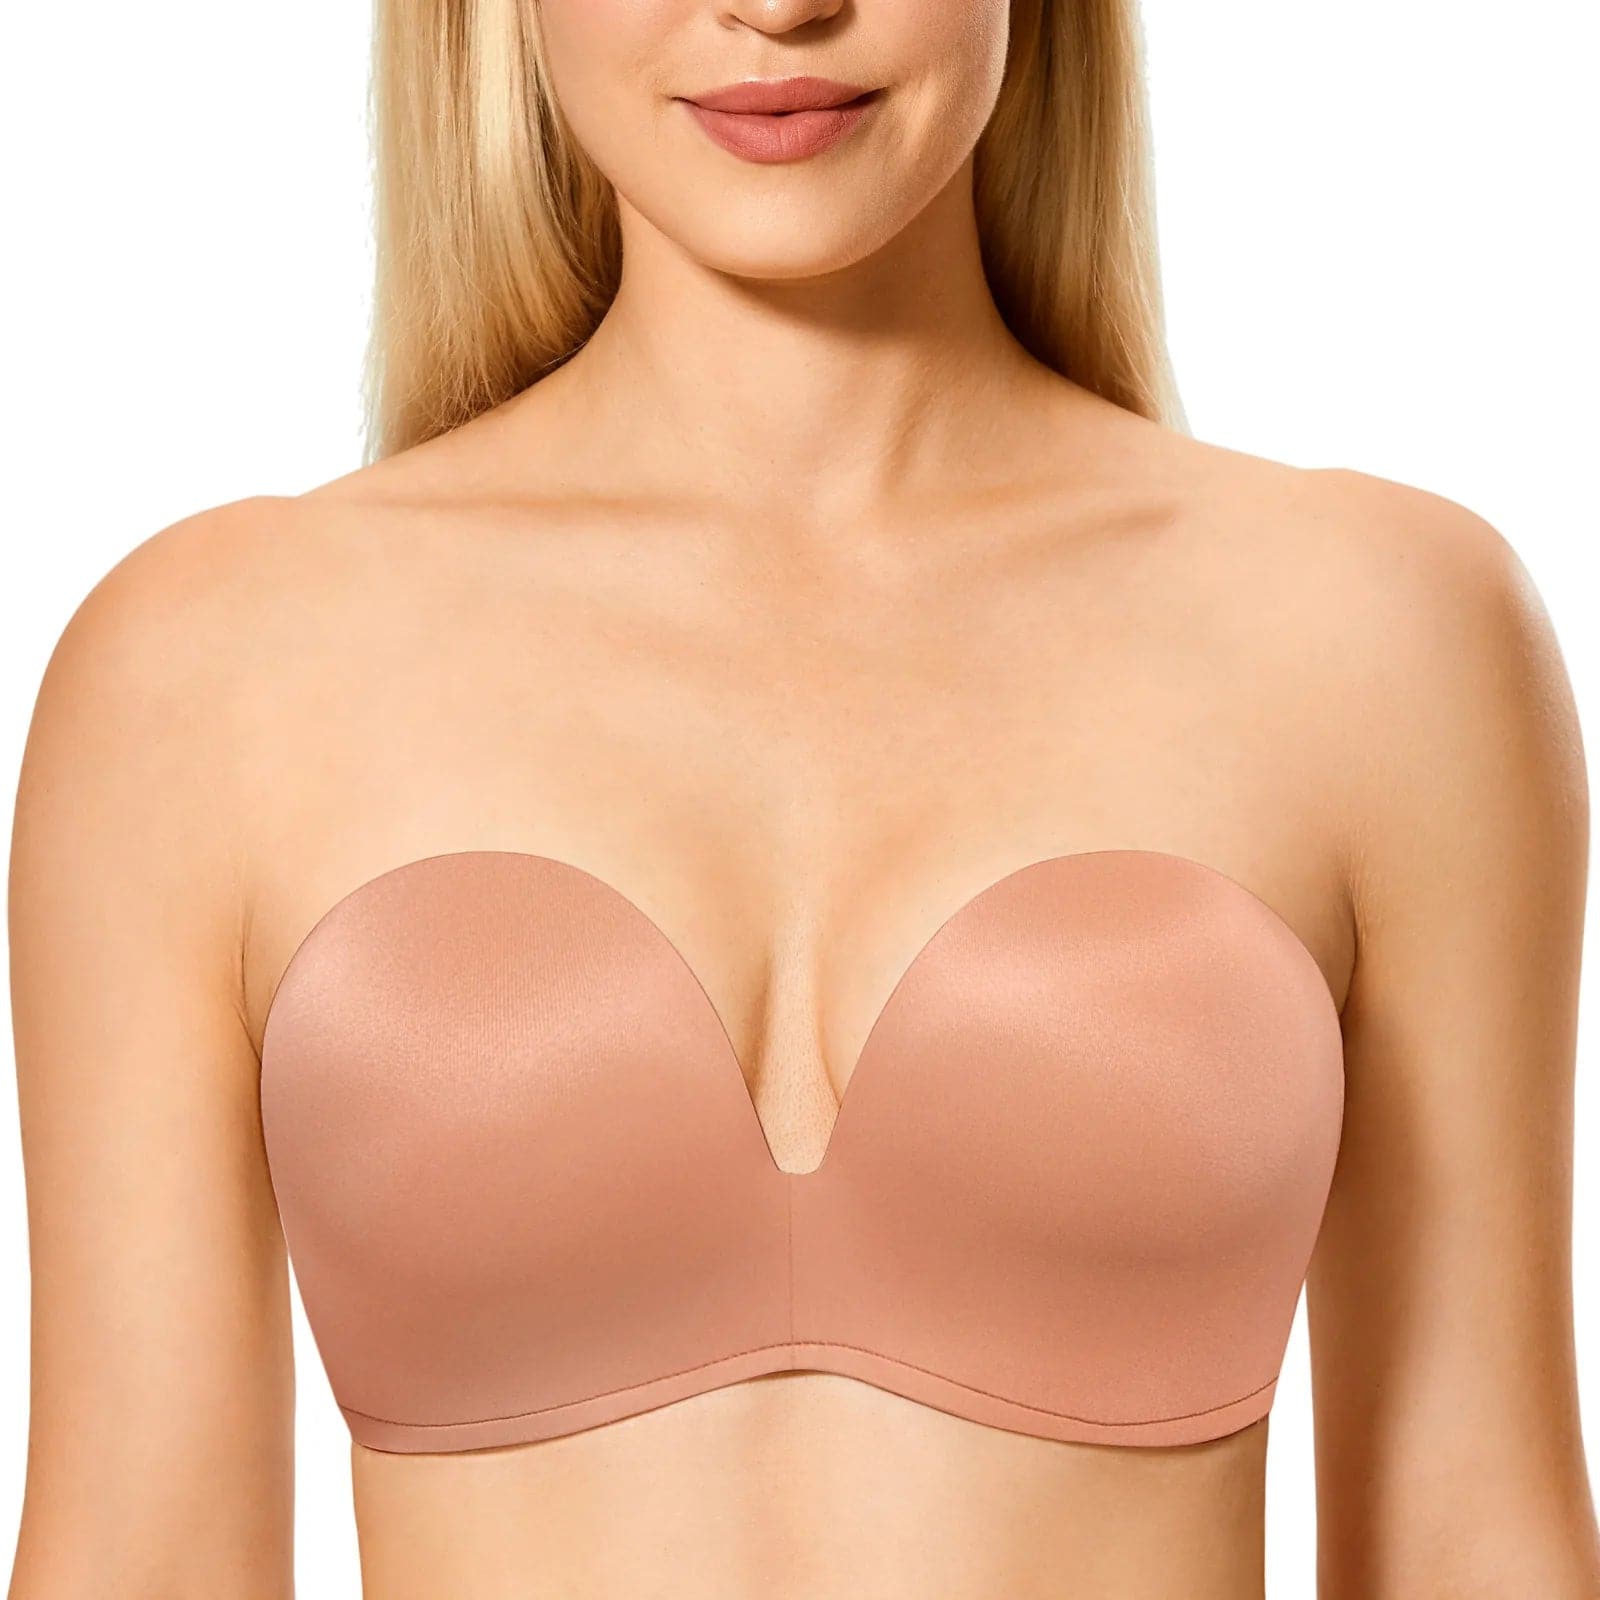 Delimira Seamless Silicone Bands Strapless Bra Plus Size - Wandering Woman